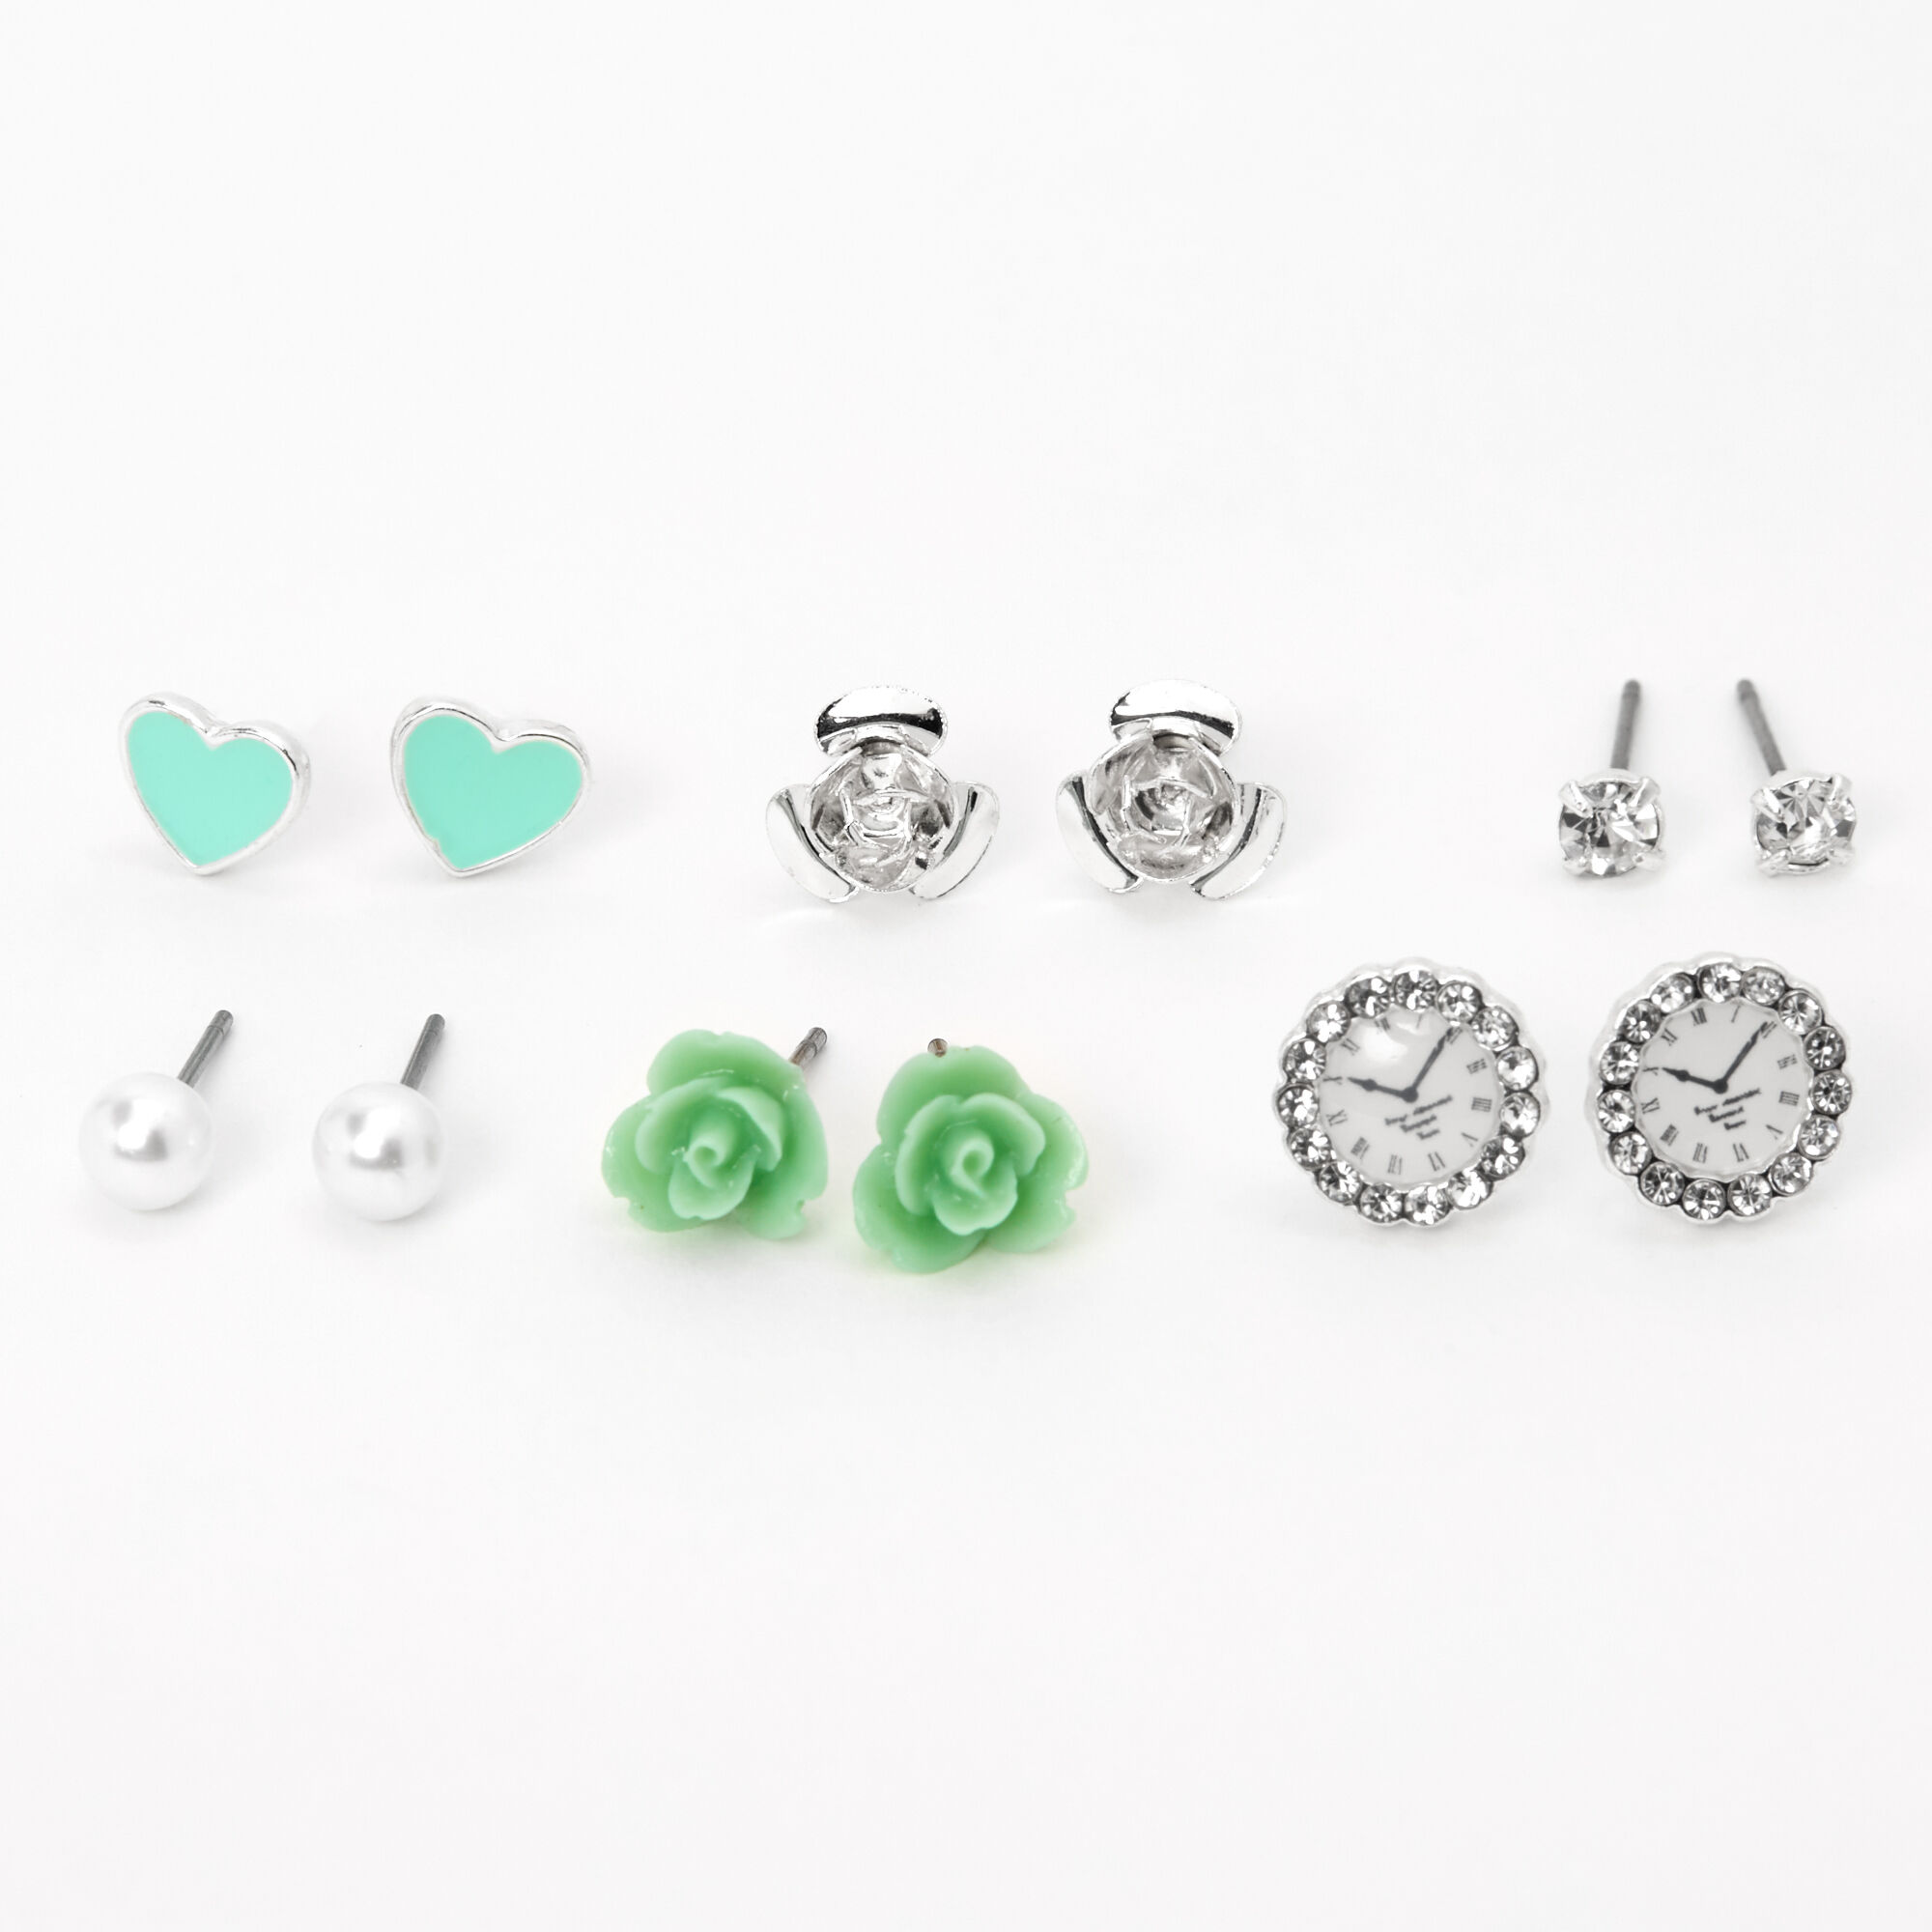 View Claires Tone Rose Pearl Stud Earrings Blue 6 Pack Silver information